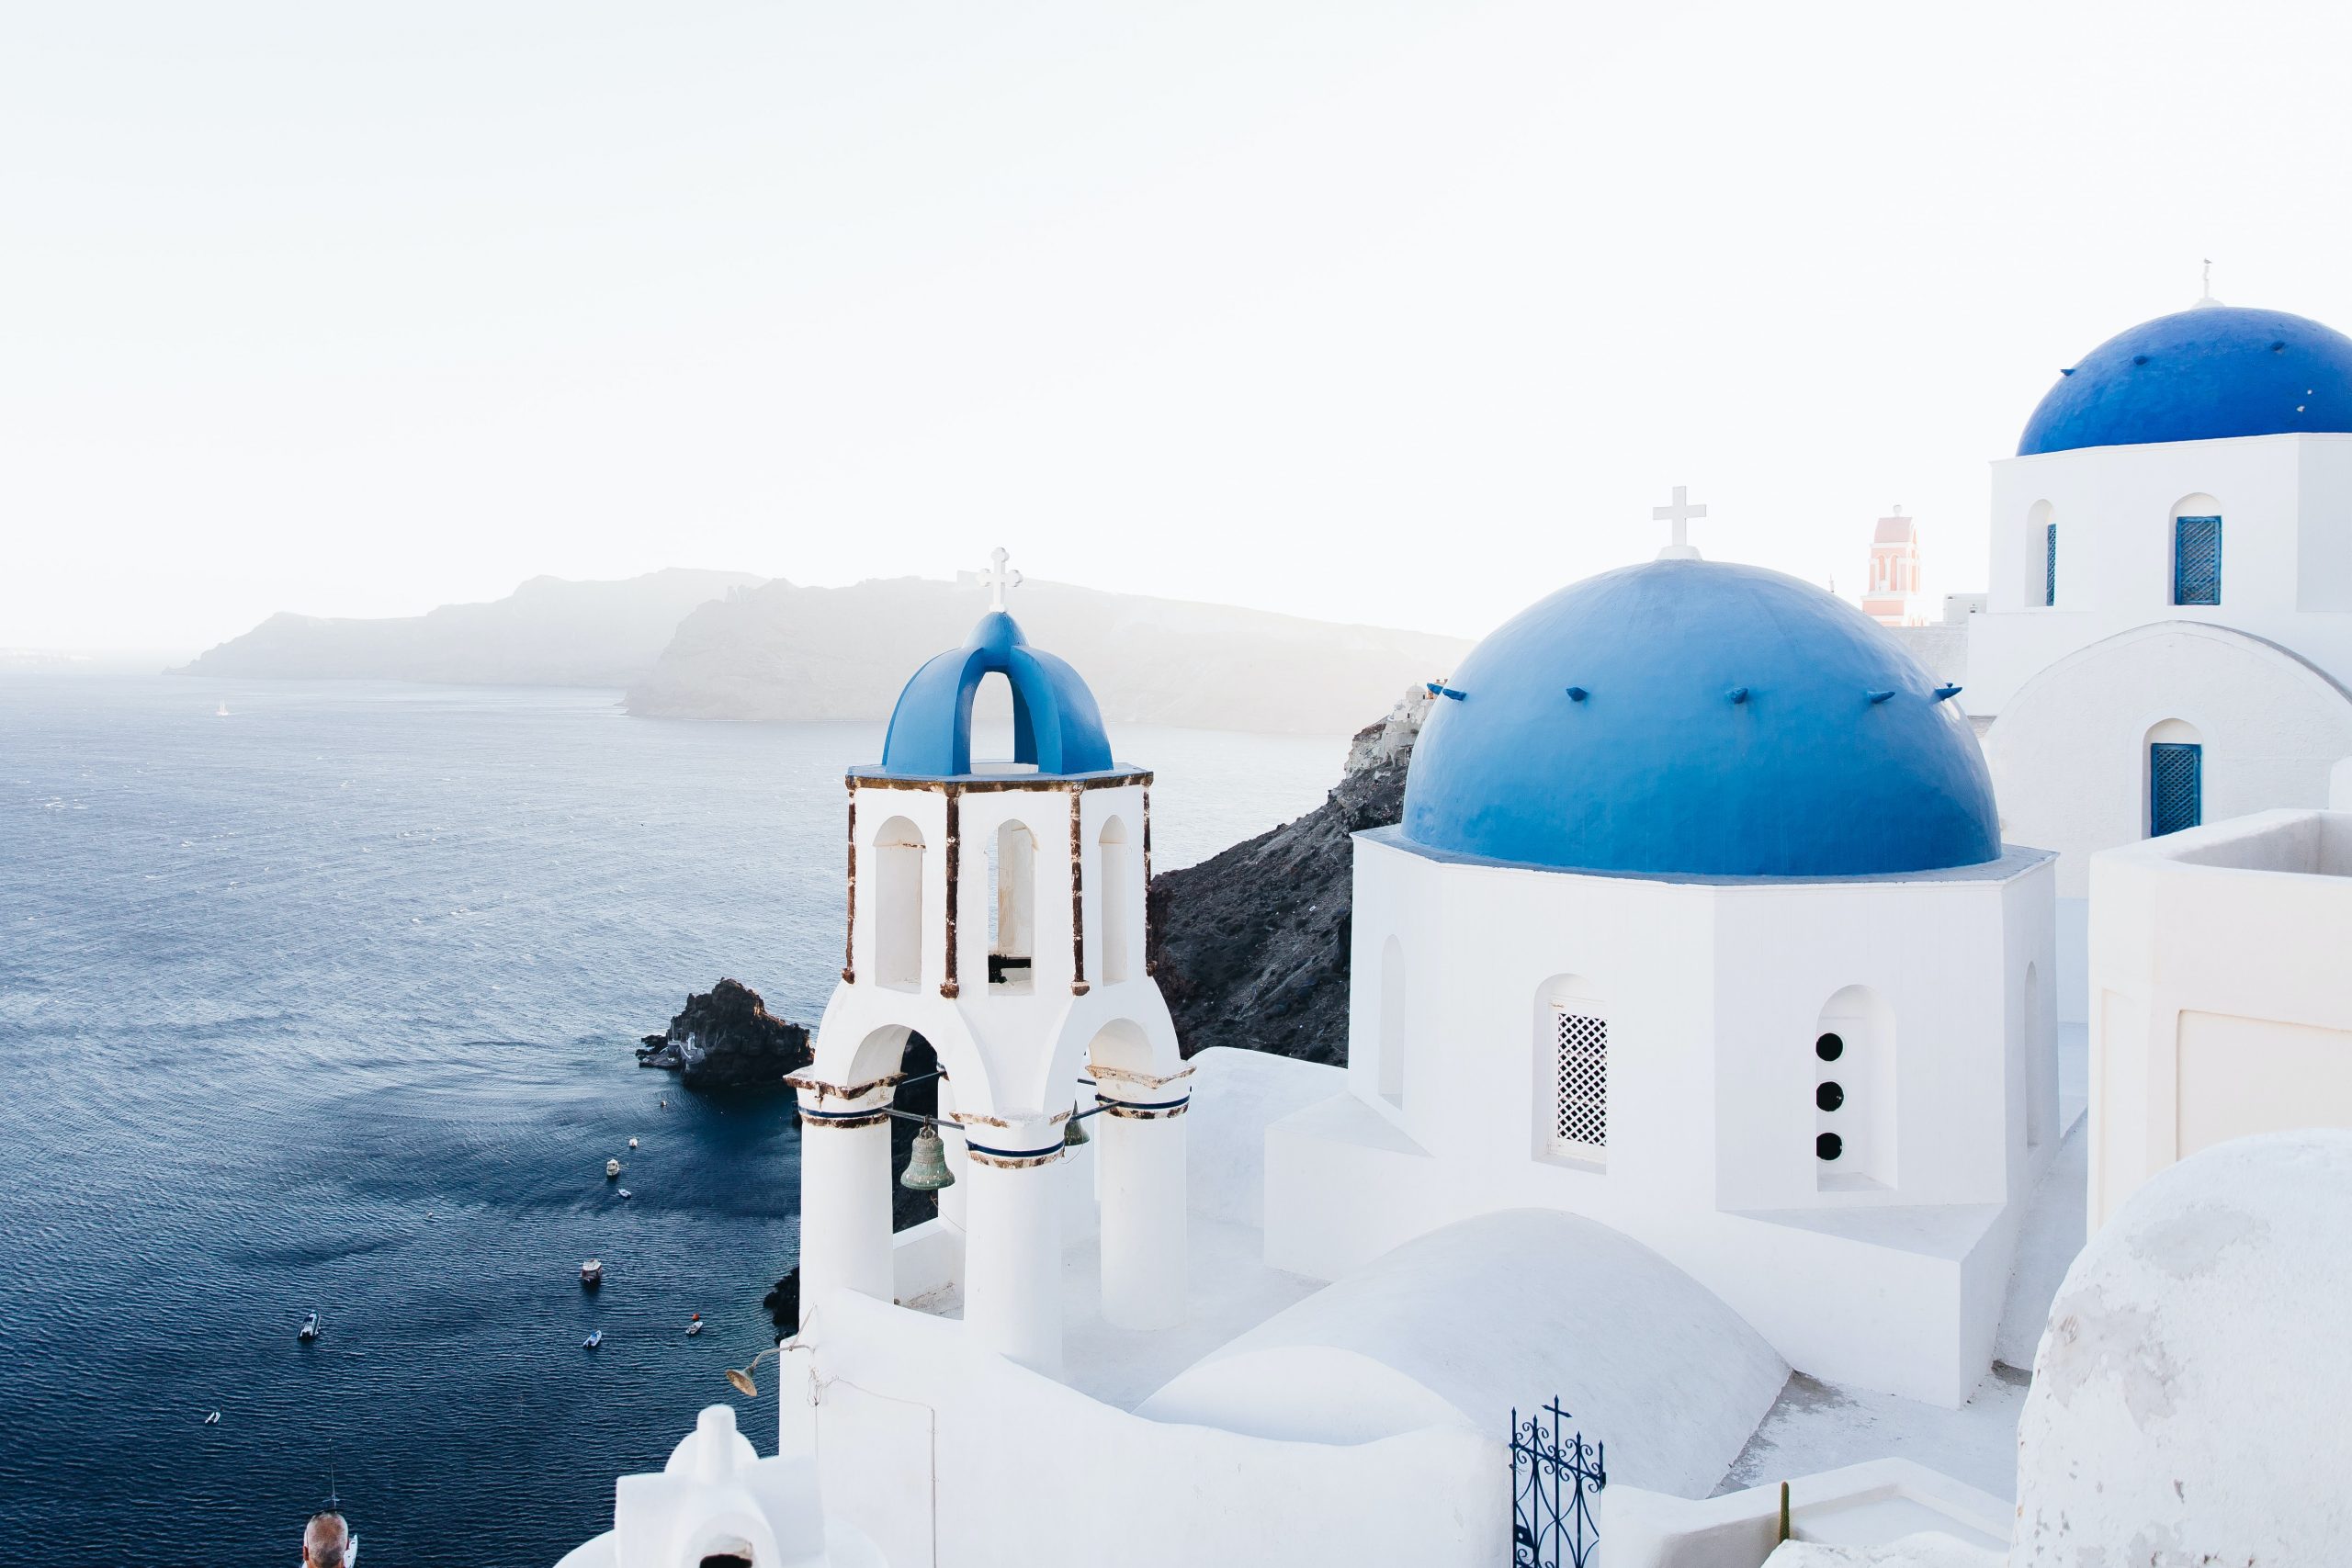 White buildings with blue roofs overlooking the ocean in Santorini